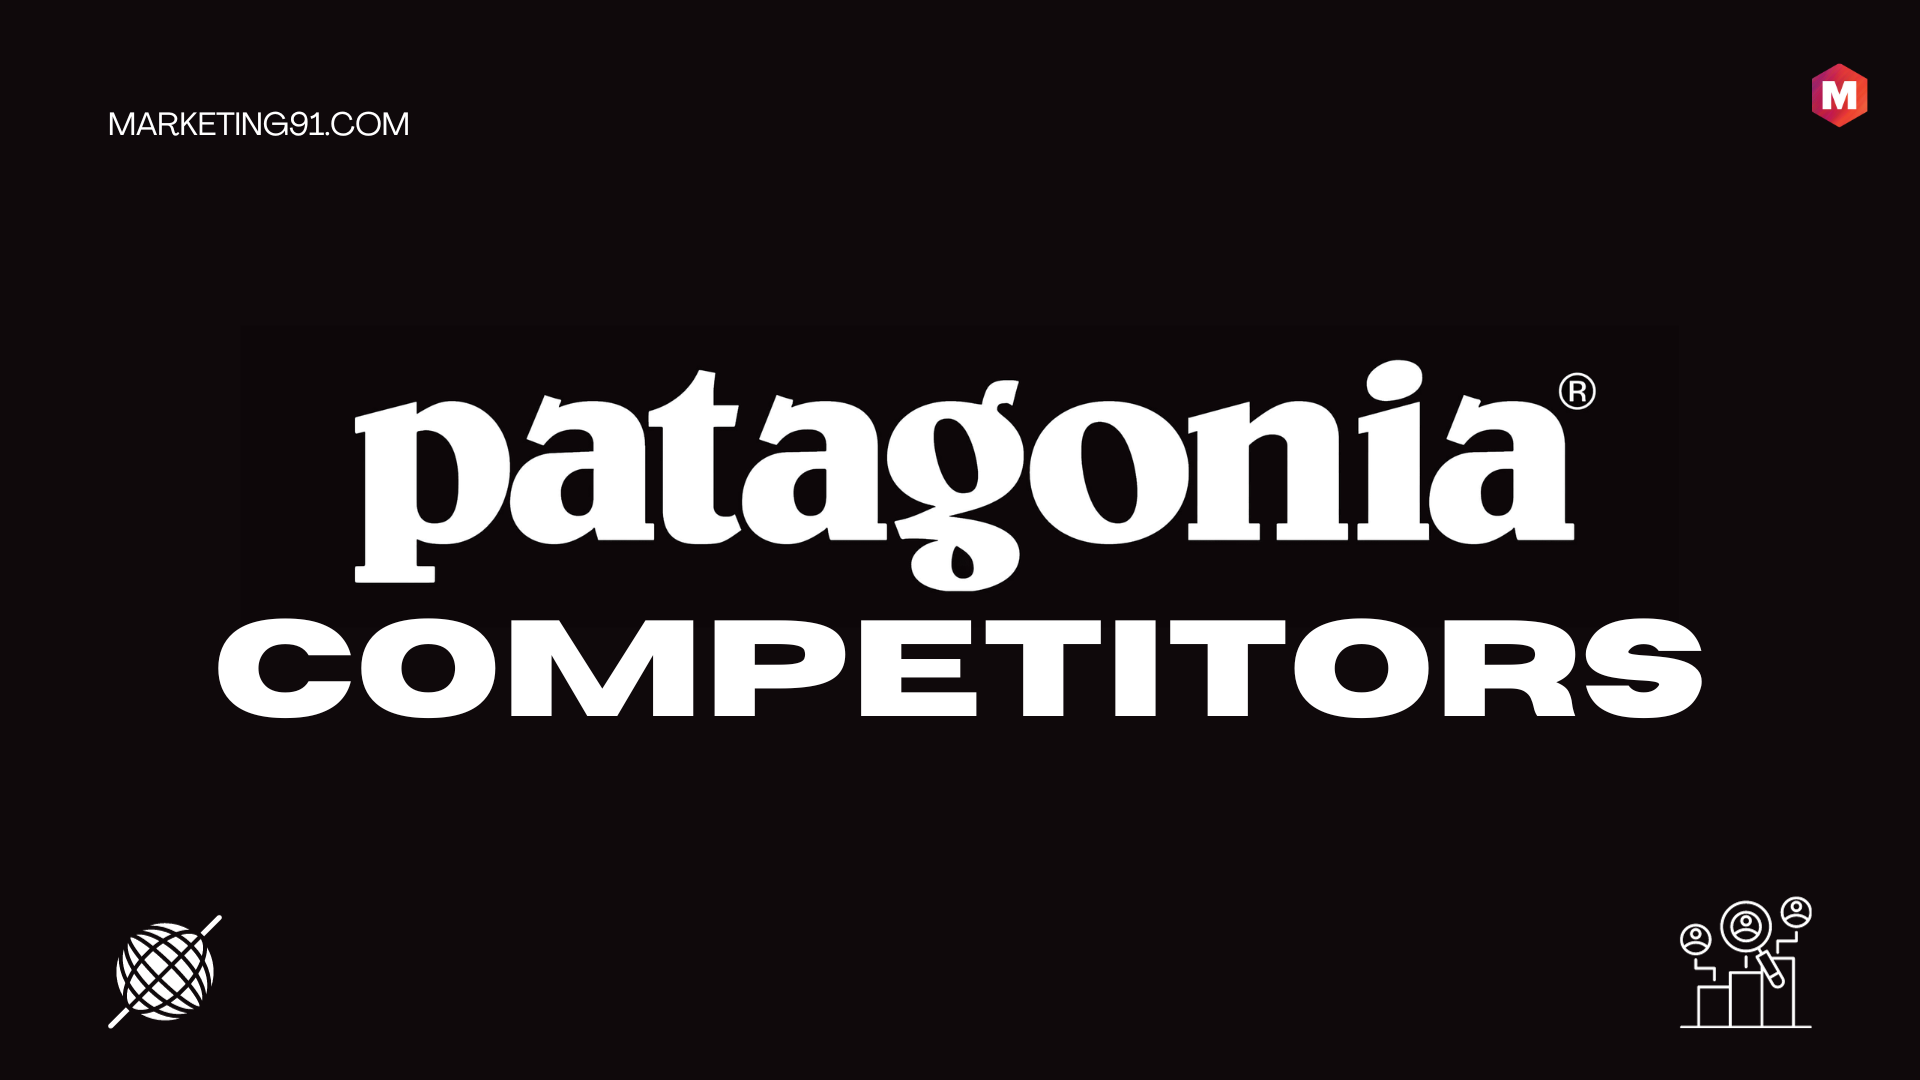 Brand Feature: Patagonia - “We're in business to save our home planet” -  River & Trail Outdoor Company